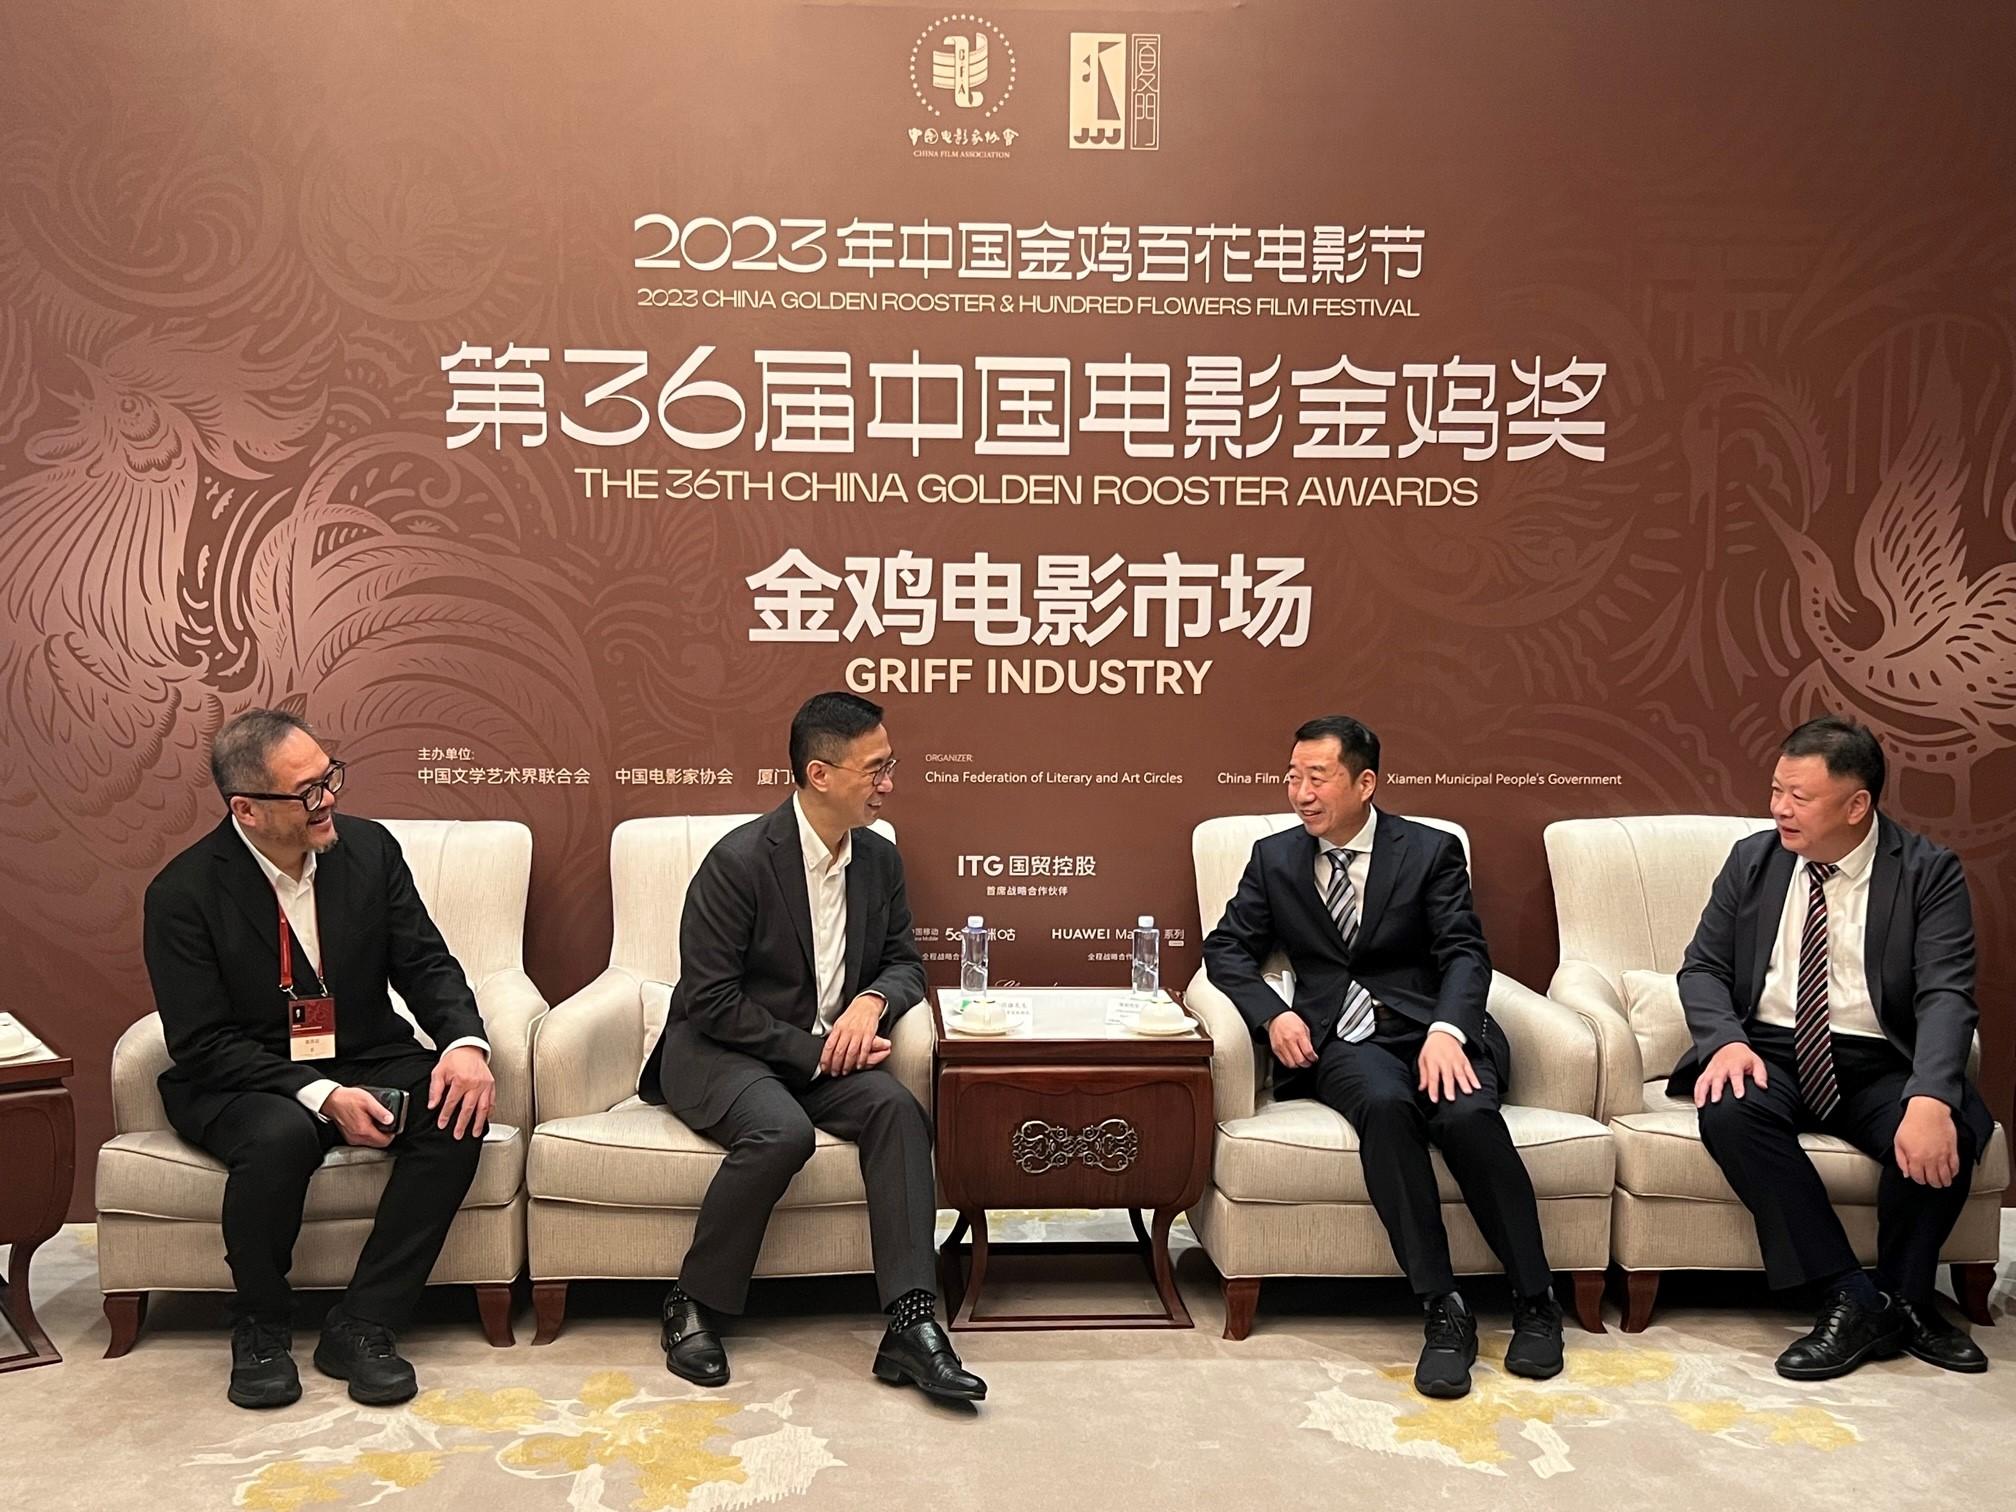 The Secretary for Culture, Sports and Tourism, Mr Kevin Yeung, continued his visit in Xiamen today (November 2). Mr Yeung (second left) met with the Sub-Party Secretary of the China Film Association, Mr Zhang Hong (second right), and the Director General of the Xiamen Film Administration, Mr Shangguan Jun (first right), to explore opportunities for co-operation. The Head of Create Hong Kong, Mr Victor Tsang (first left), was also present.